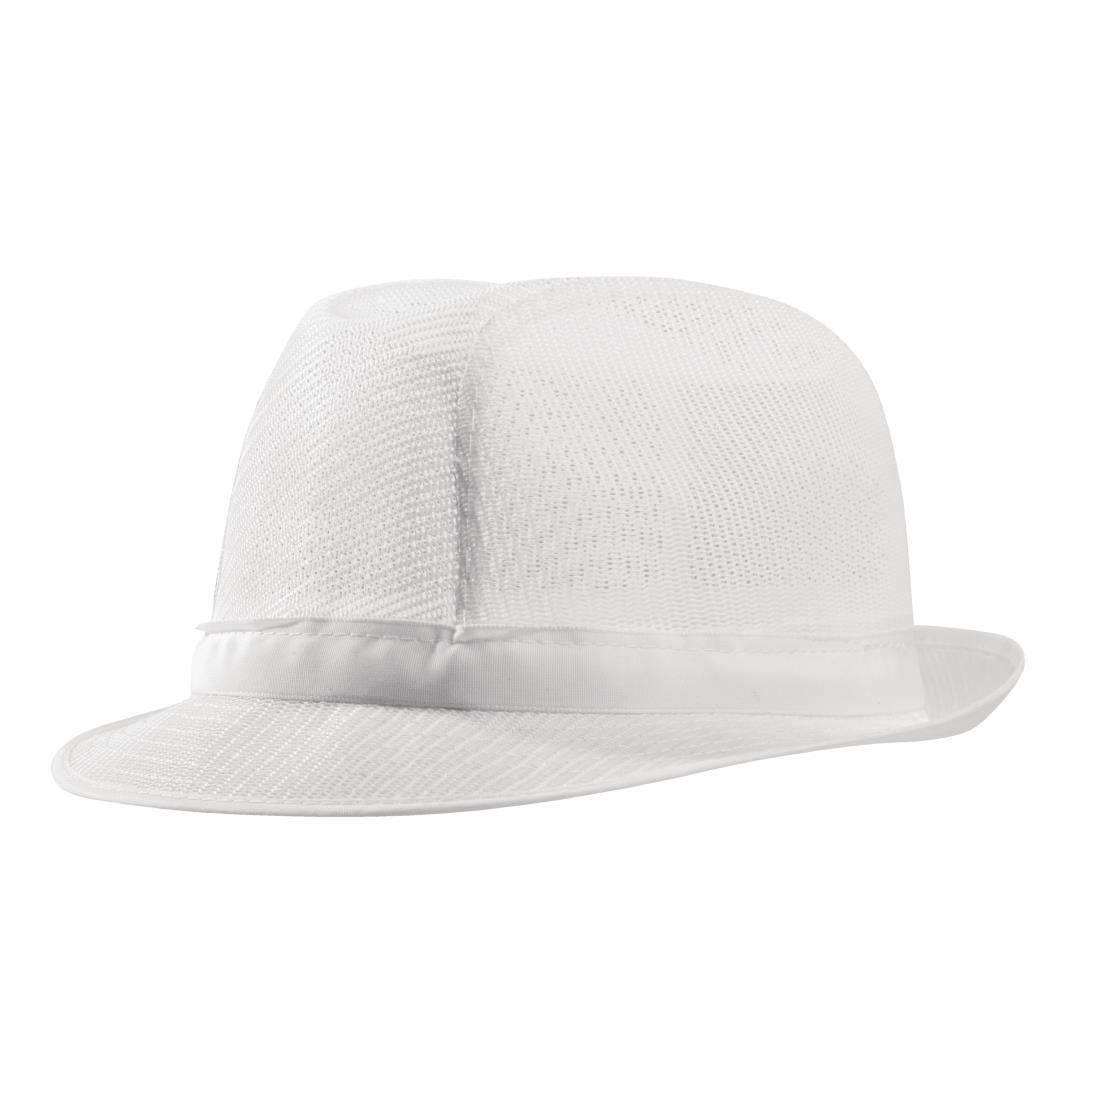 Trilby Hat with Net Snood White M - A653-M  - 2